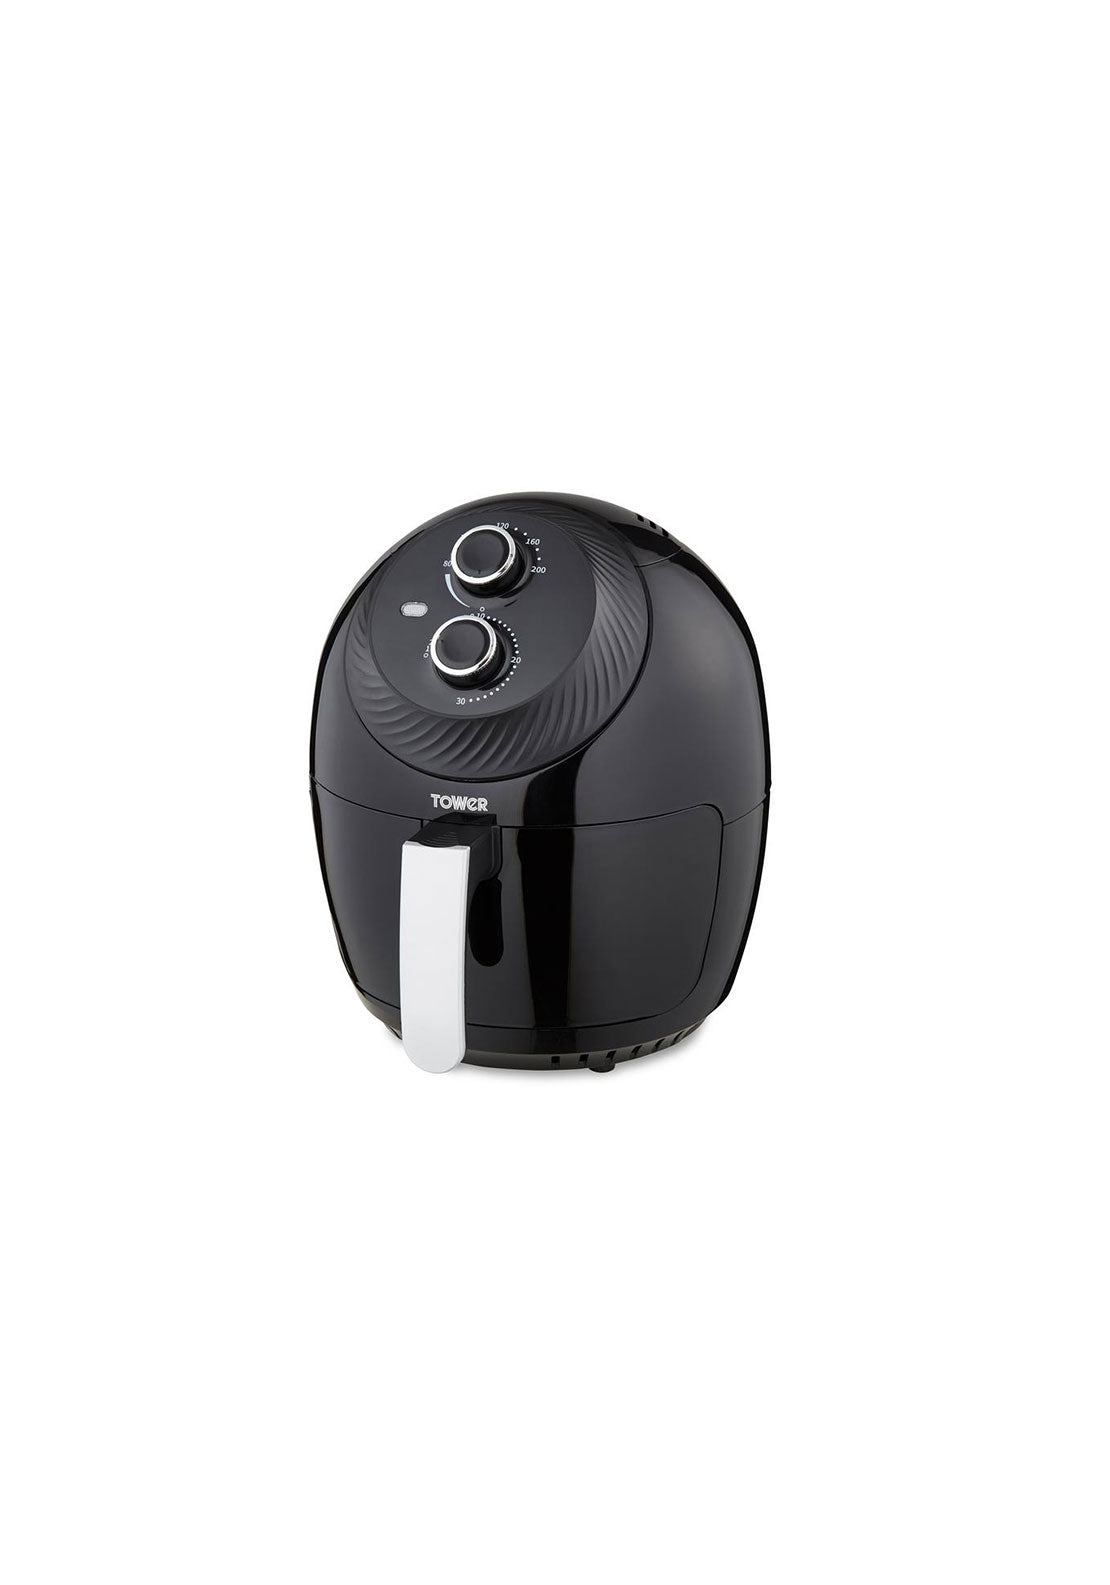 Tower Vortx 4L Manual Air Fryer | T17082 11 Shaws Department Stores